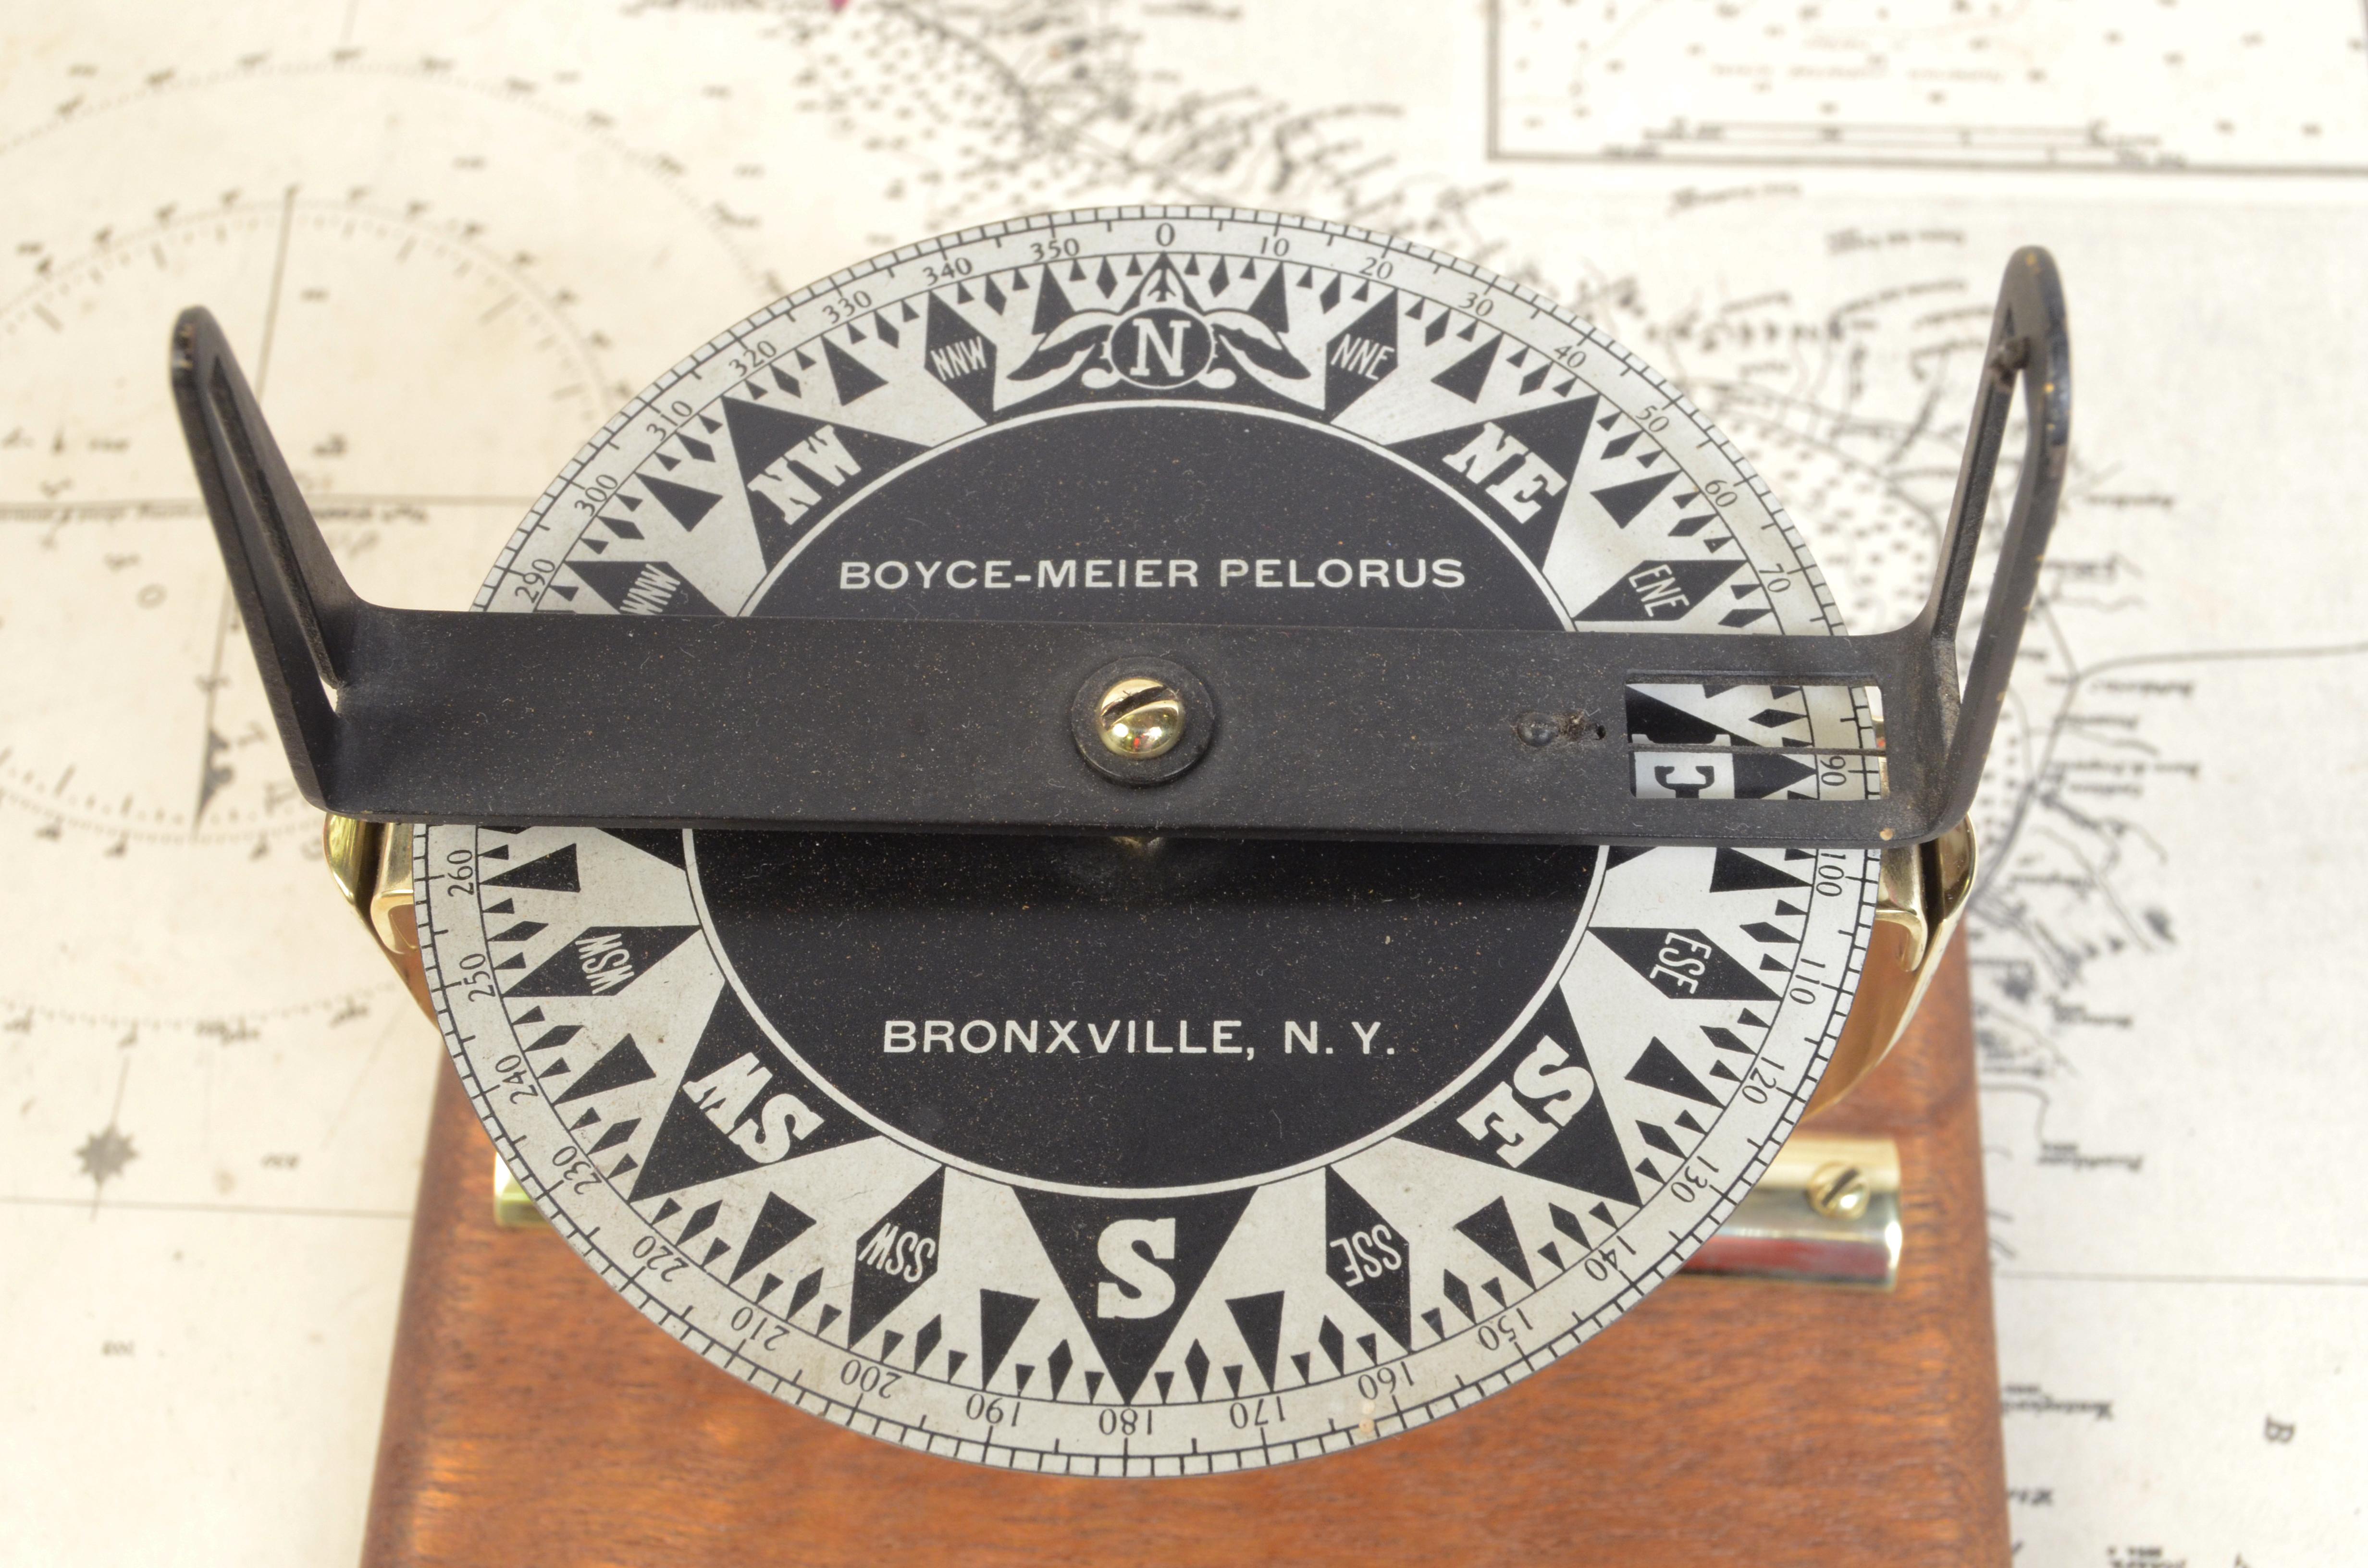 Antique small brass Pelorus, signed Boyce-Meyer Pelorus Bronxonville N.Y., made in the late of the XIX century. It has a sight system with a compass card with eight winds and goniometric circle. The pelorus is mounted on a wood plank. Very good